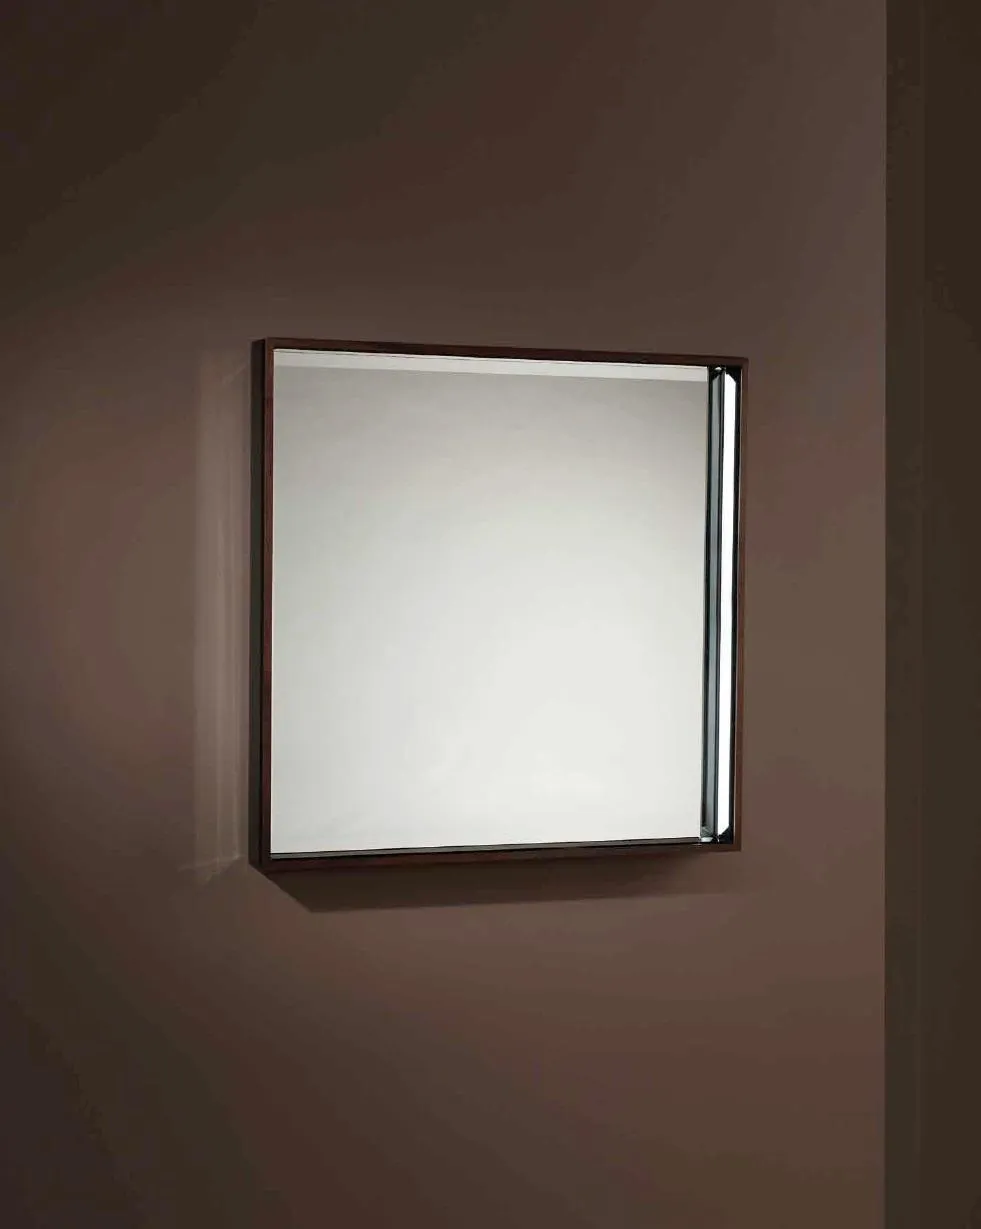 Mirror with living room wall mirror living room new frame brown color